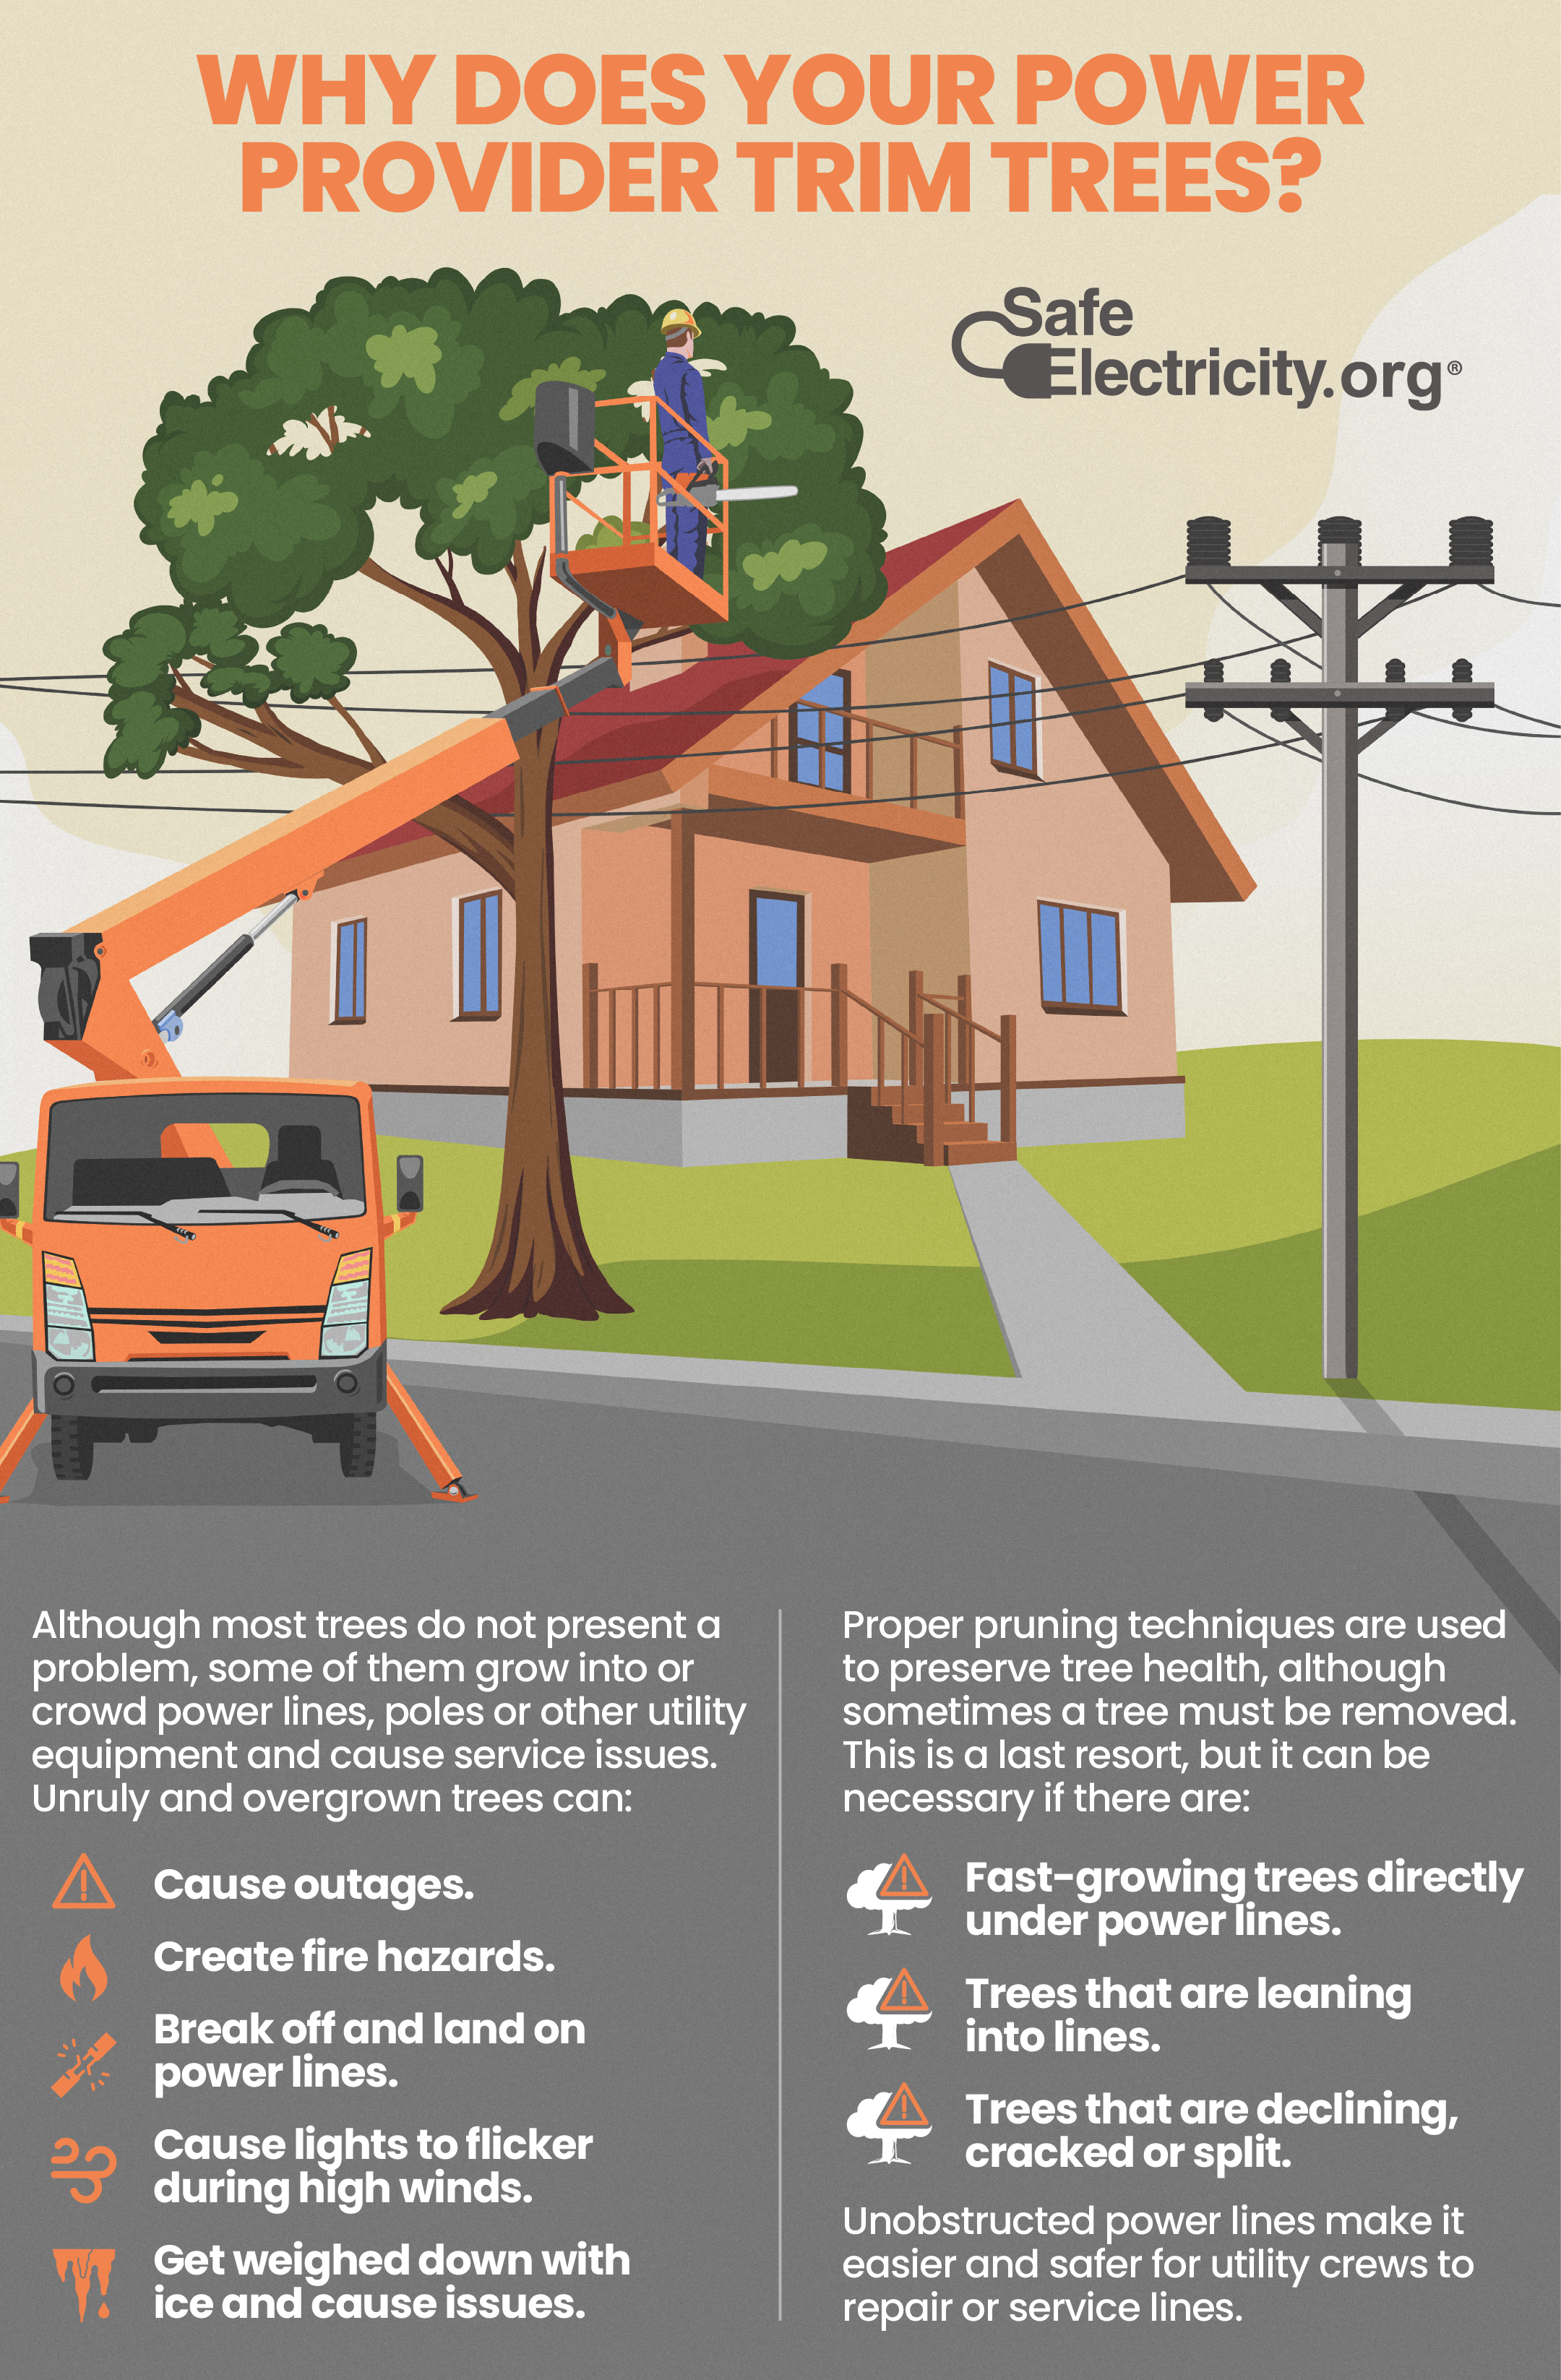 WHY DOES YOUR POWER PROVIDER TRIM TREES? Although most trees do not present a problem, some of them grow into or crowd power lines, poles or other utility equipment and cause service issues. Unruly and overgrown trees can: -Cause outages. -Create fire hazards. -Break off and land on power lines. -Cause lights to flicker during high winds. -Get weighed down with ice and cause issues. Proper pruning techniques are used to preserve tree health, although sometimes a tree must be removed. This is a last resort, but it can be necessary if there are: -Fast-growing trees directly under power lines. -Trees that are leaning into lines. -Trees that are declining, cracked, or split. Unobstructed power lines make it easier and safer for utility crews to repair or service lines.